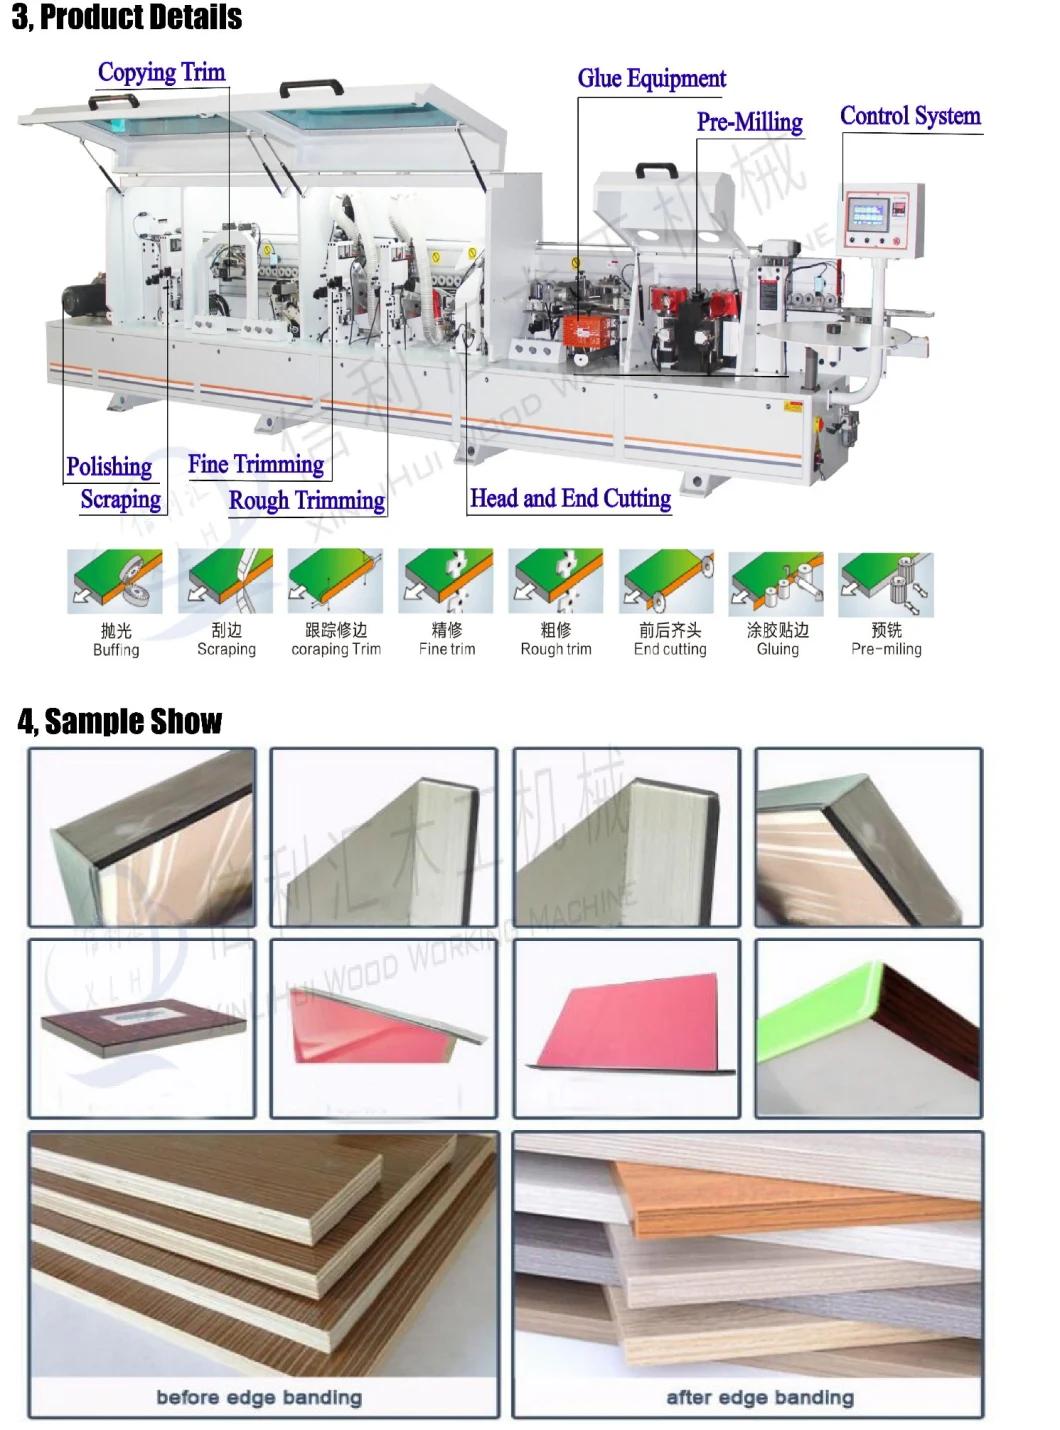 PVC Edge Banding Build a Wooden Products Factory in Pakistan. Automatic Sealing Side Machine, Wooden Automatic Sealing Side Machine, Automatic Edge Banding